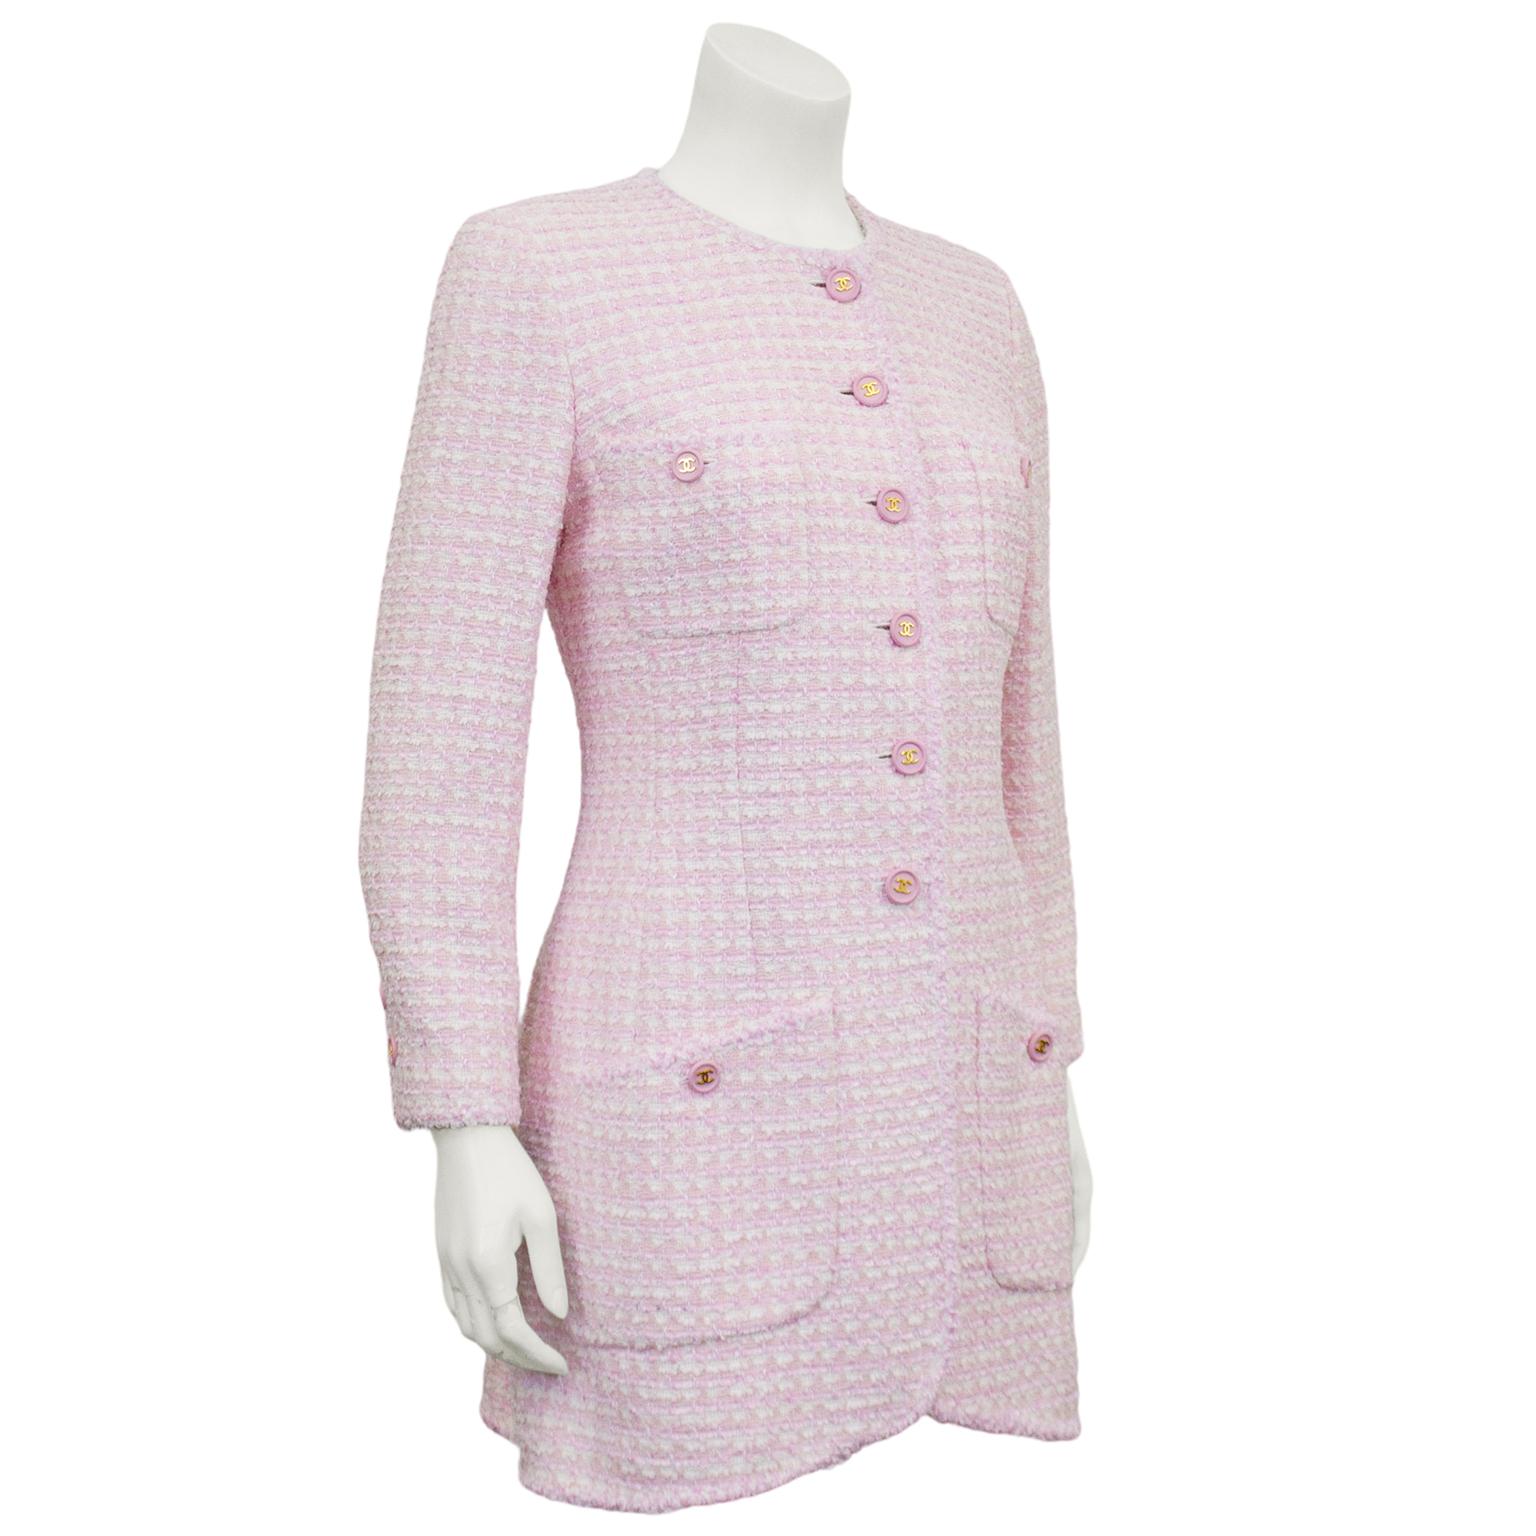 Pale pink and white bouclé jacket from the spring 1998 Chanel collection. Crew neckline, long sleeves, four large patch pockets and tulip hem. Large pink plastic round buttons with gold CC logos down front and at cuffs. White lining. Beautiful shape